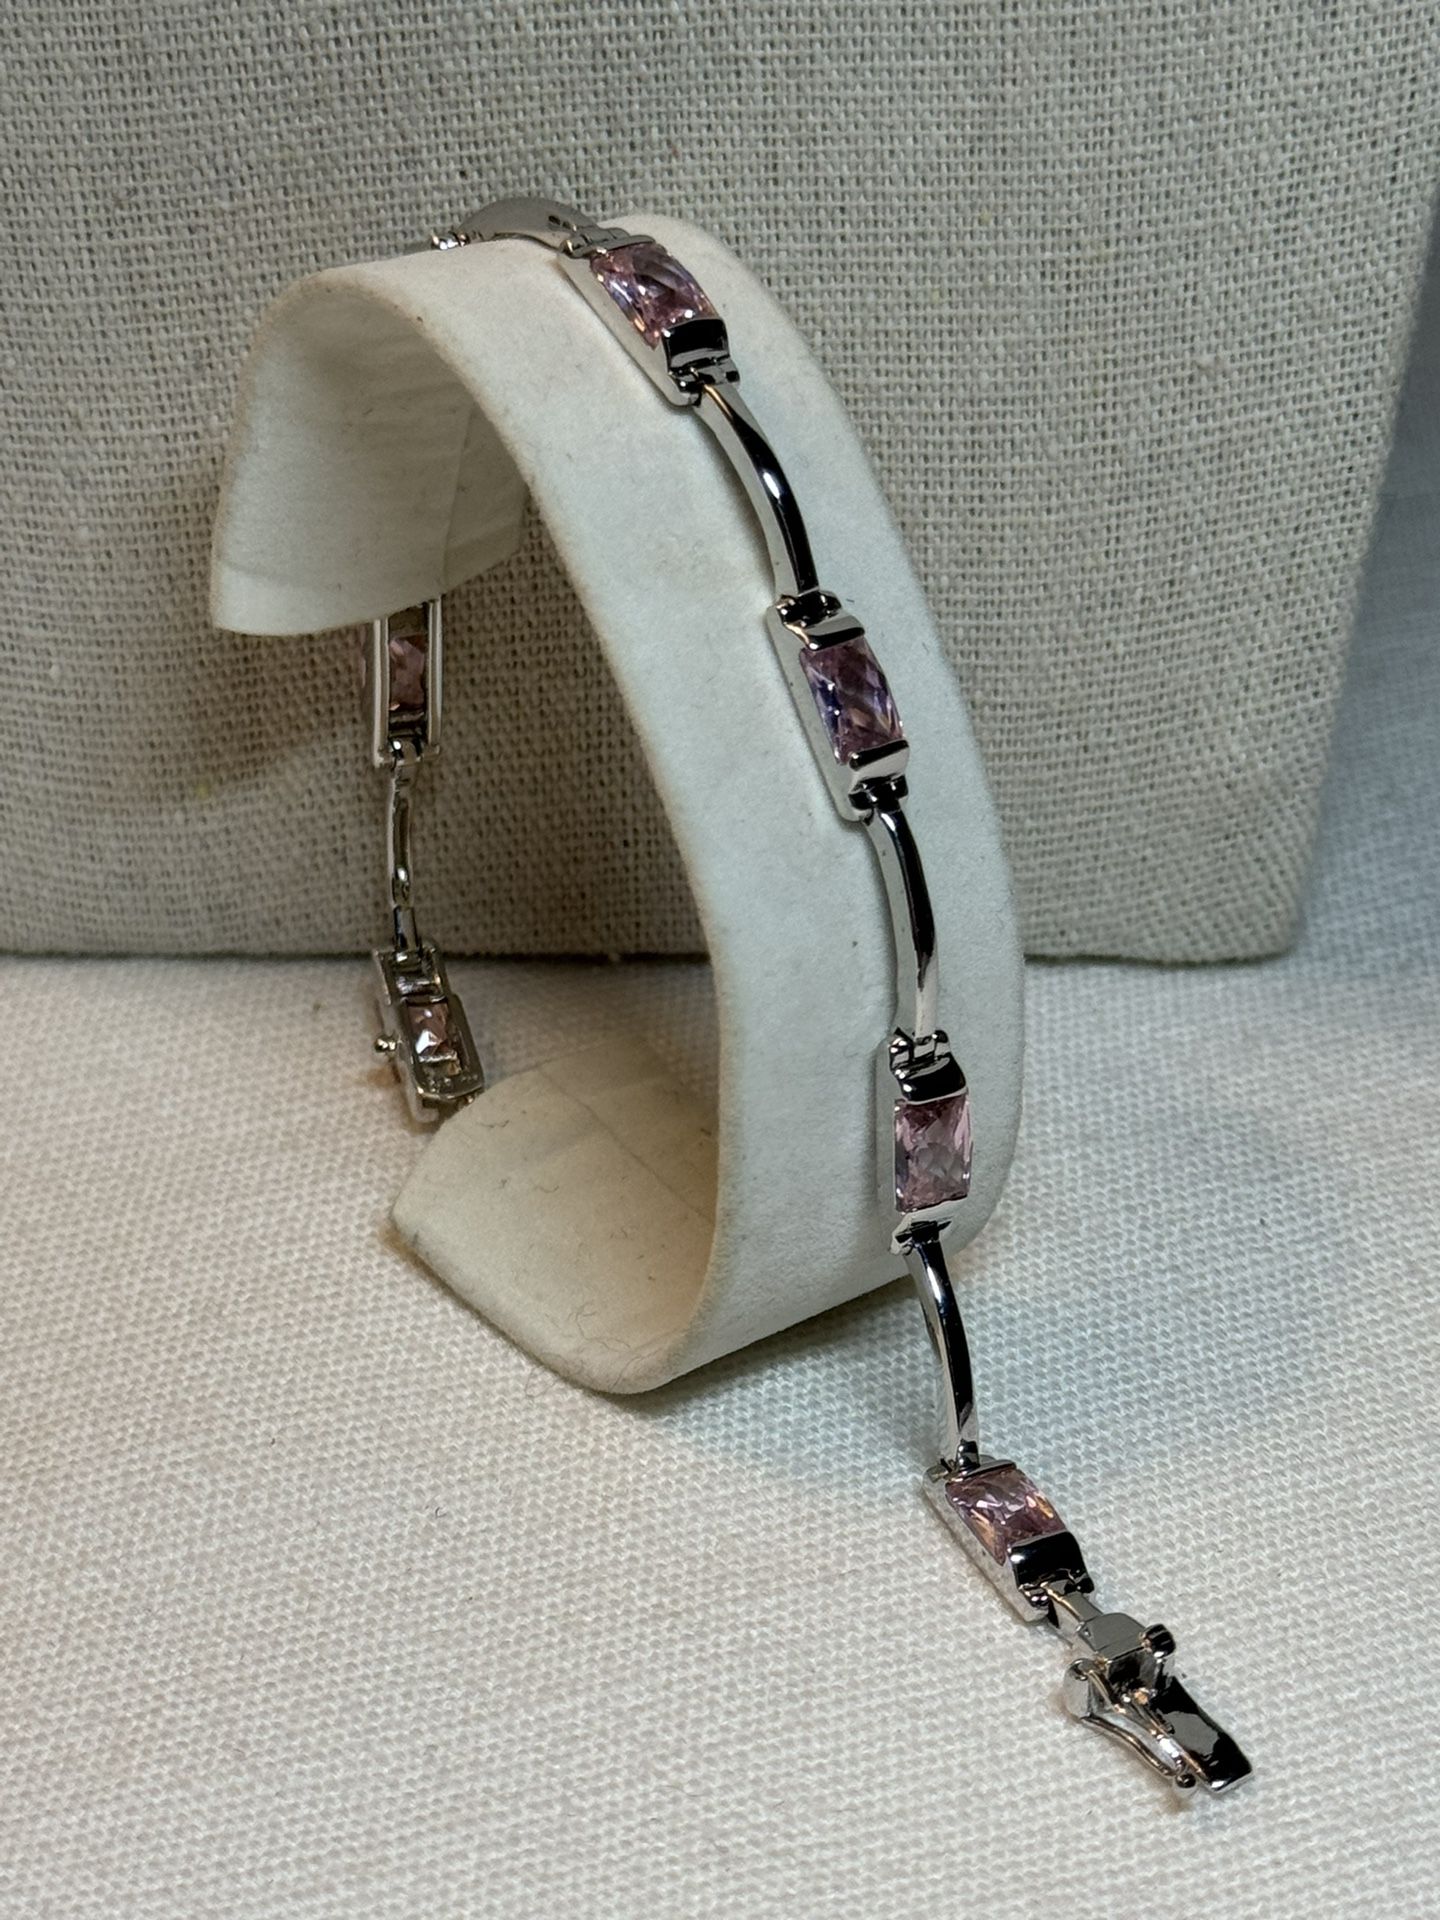 ** PENDING**  925 FAS Silver and Pink Faceted Glass Crystal Link Bracelet with Safety Clasp